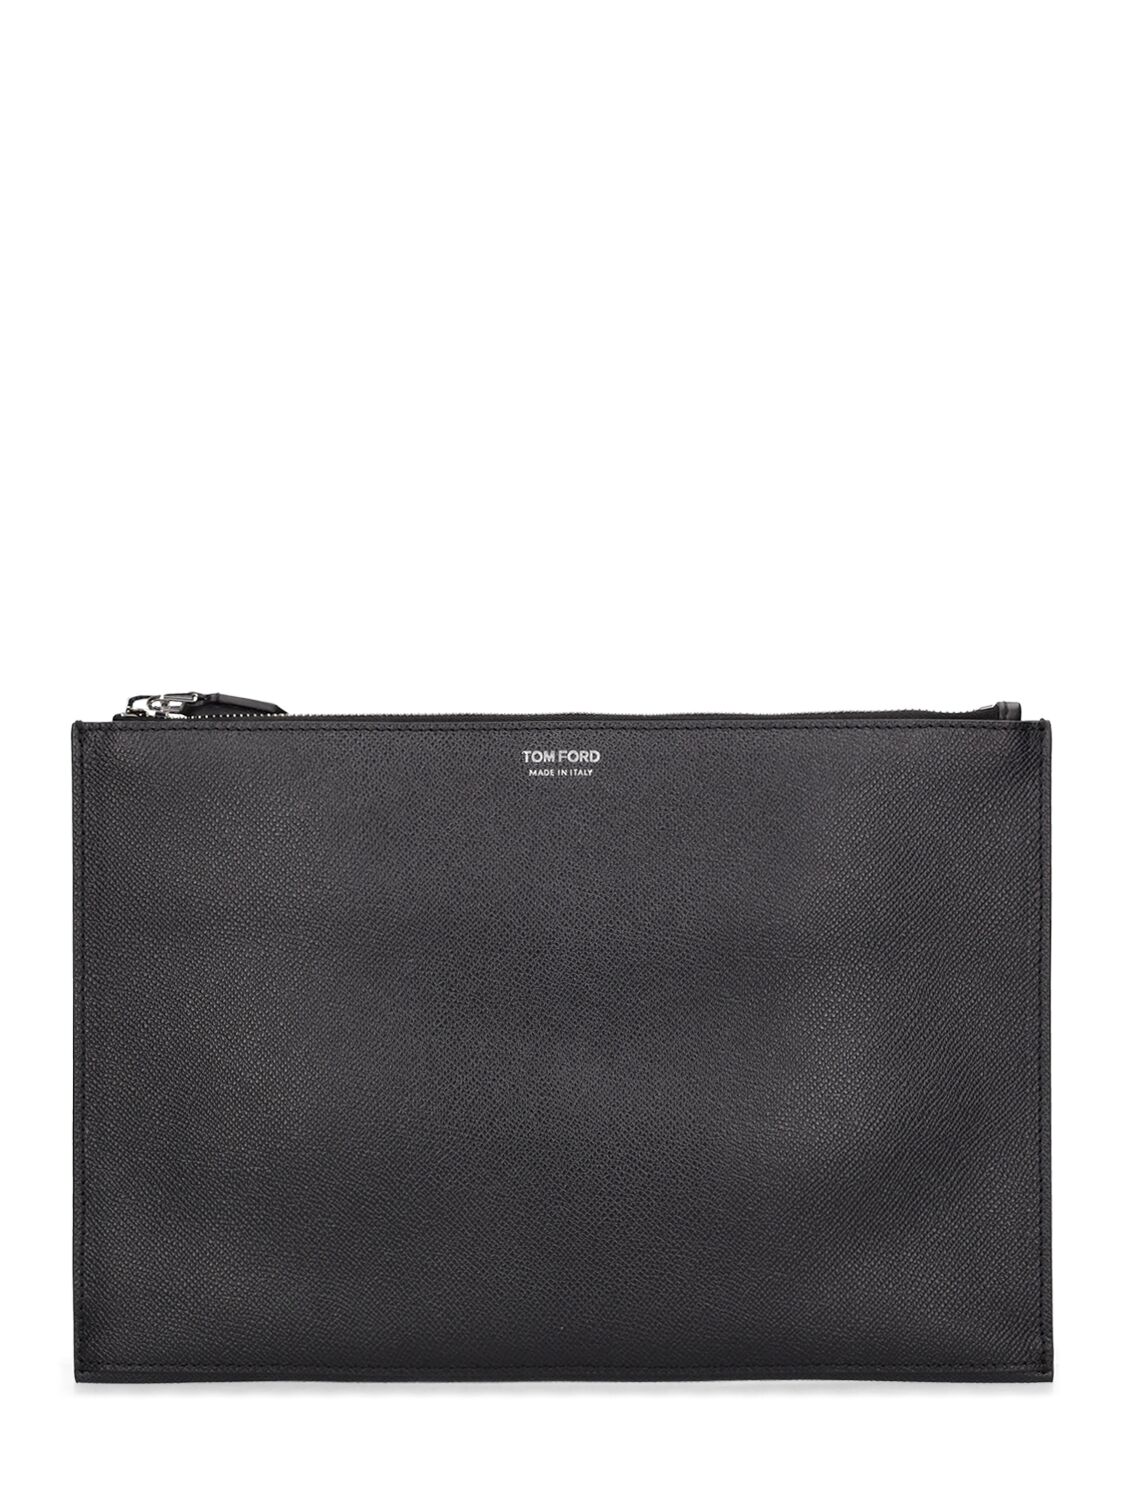 Tom Ford Small Grain Leather Pouch In Black